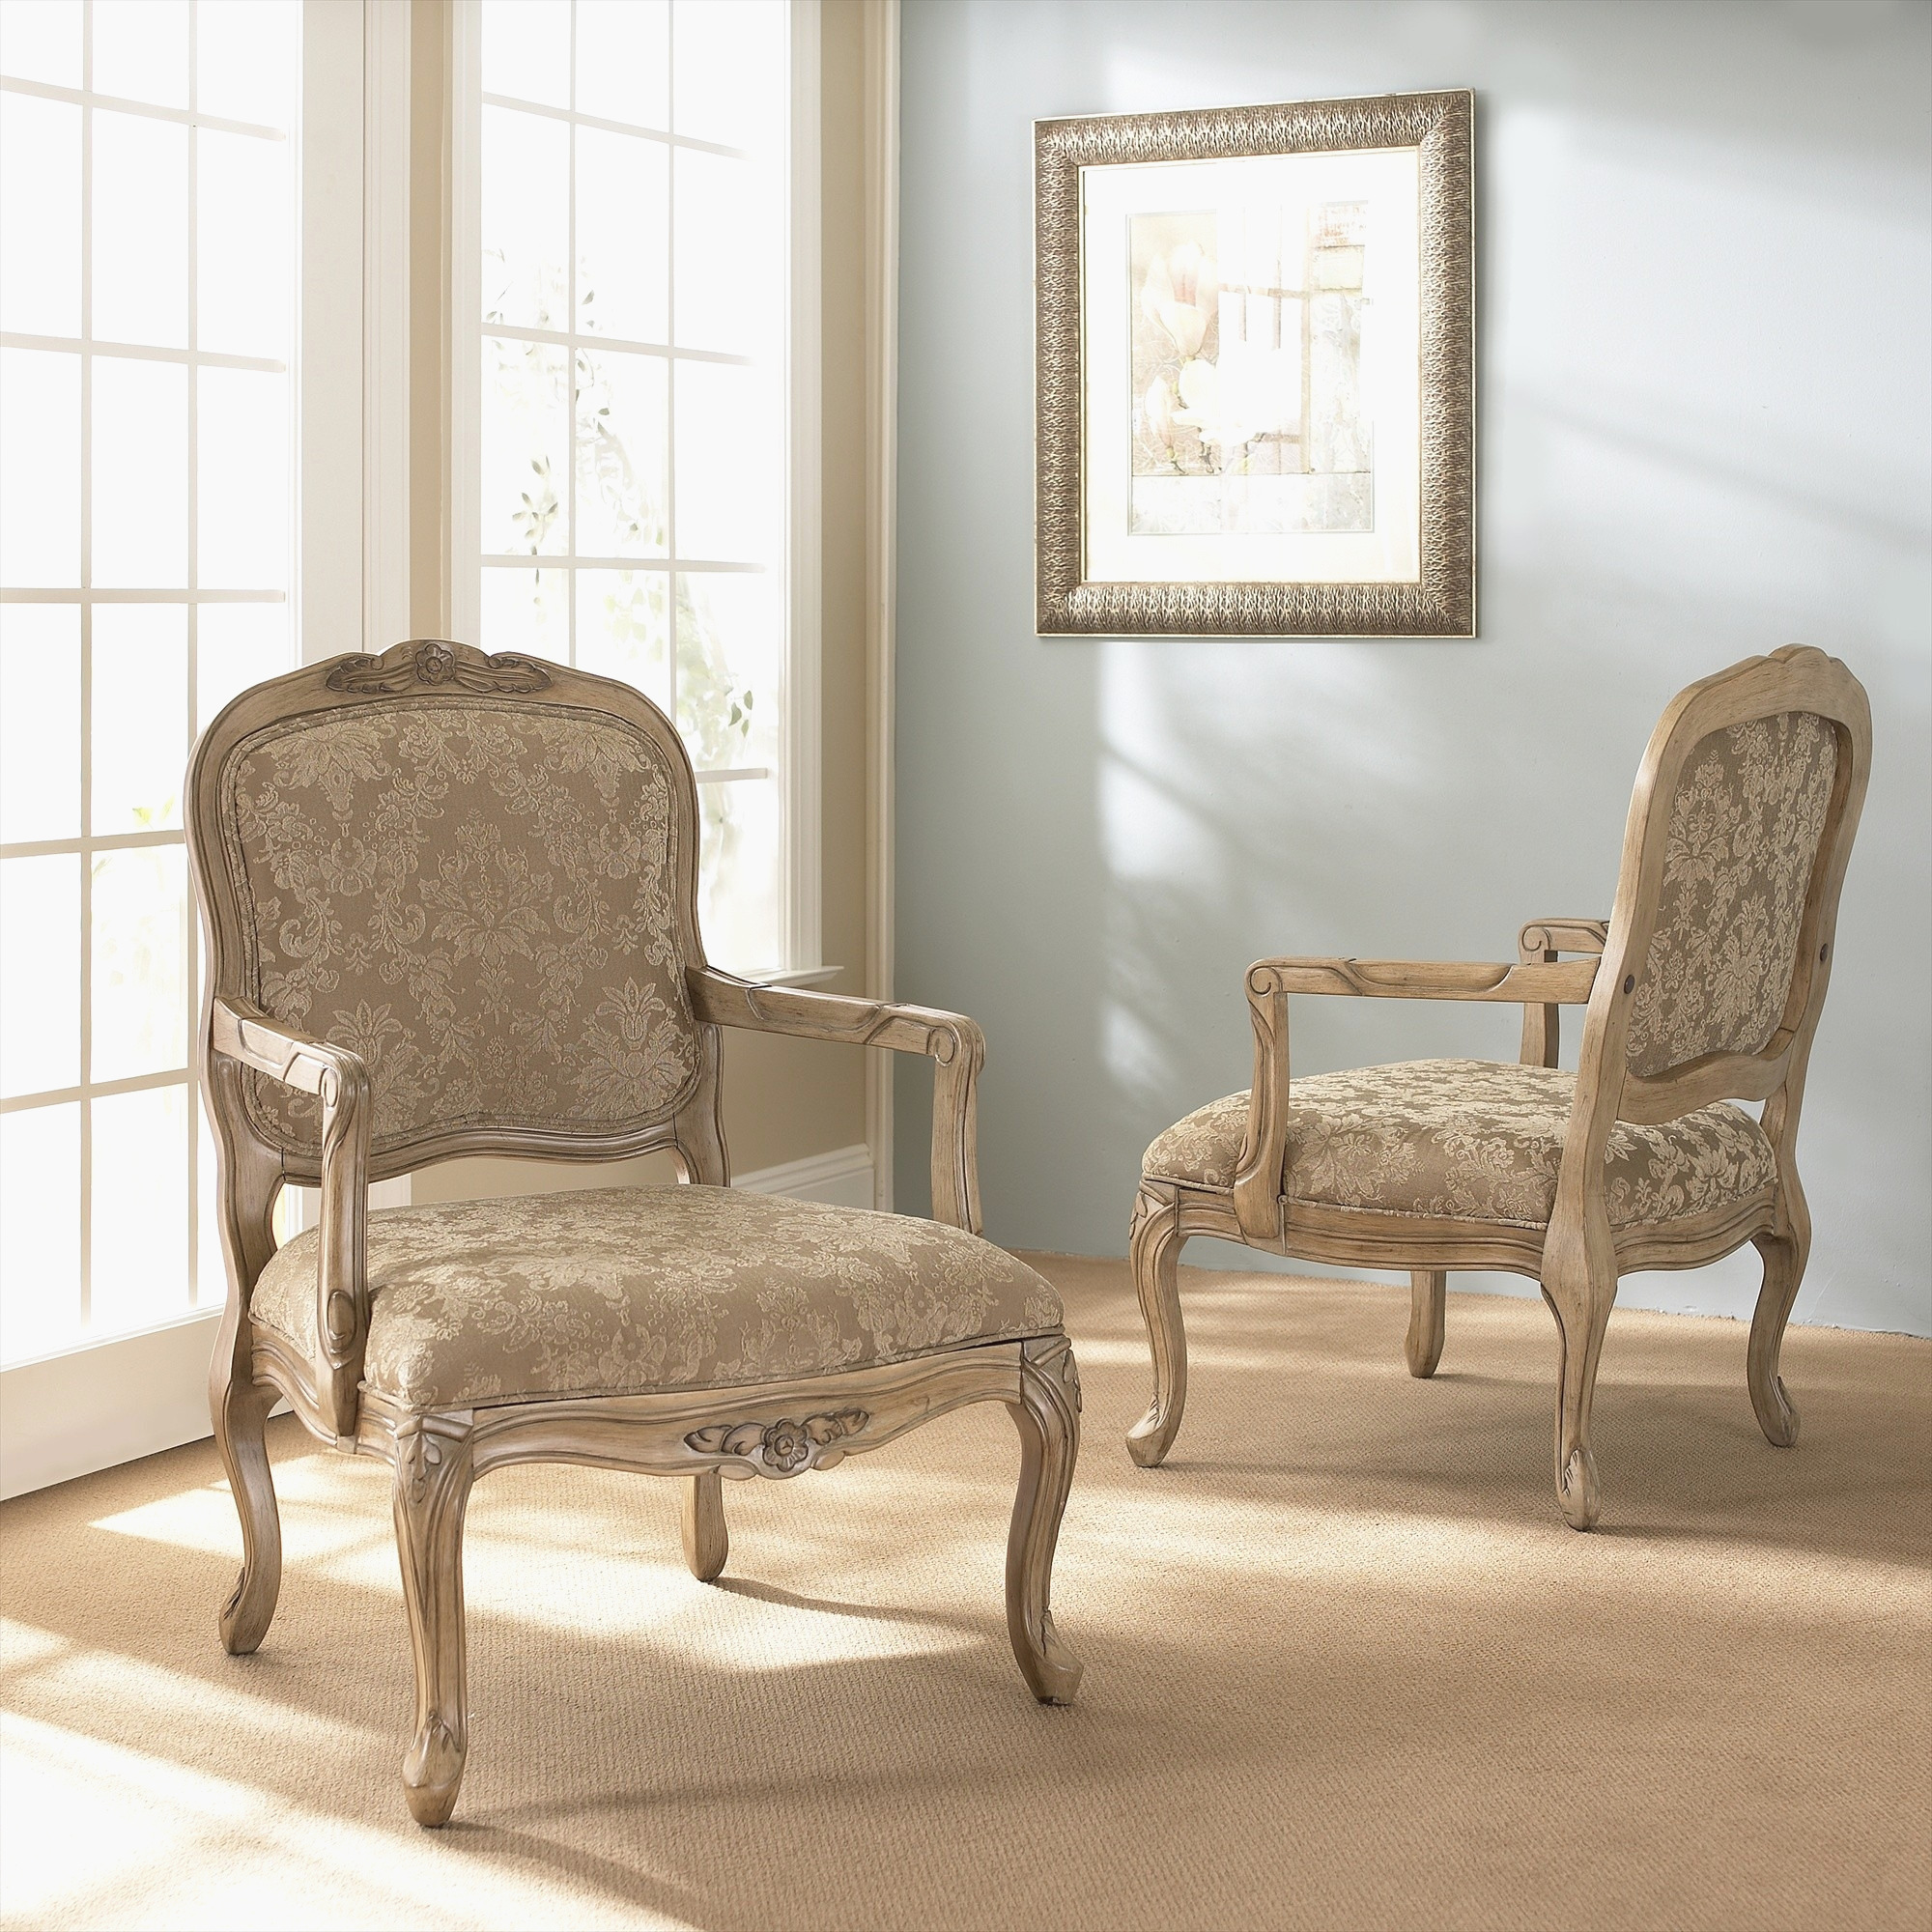 Table Decorative Unique Accent Chairs For Living Room 7 Fabric With Arms  Barrel Clearance Small Swivel